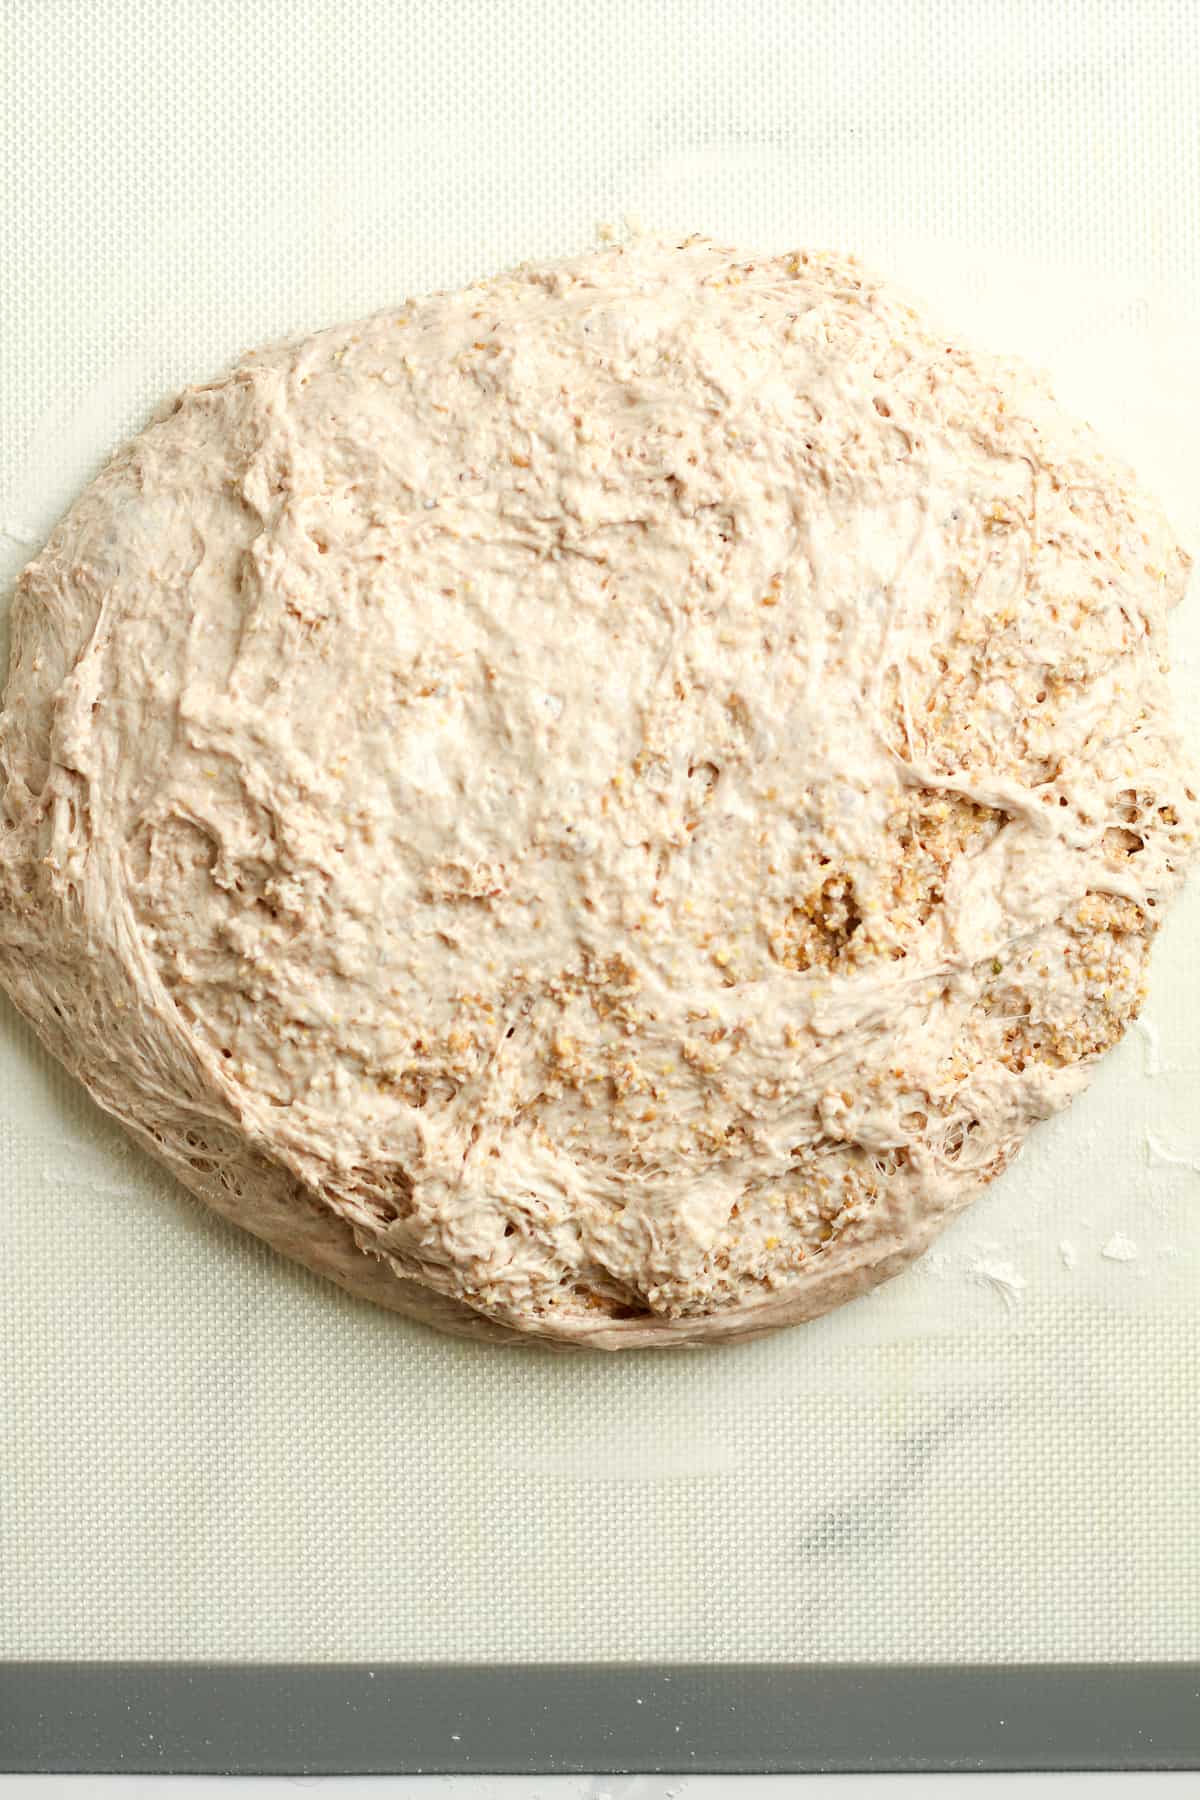 The multigrain dough on a baking mat after dumping it there.